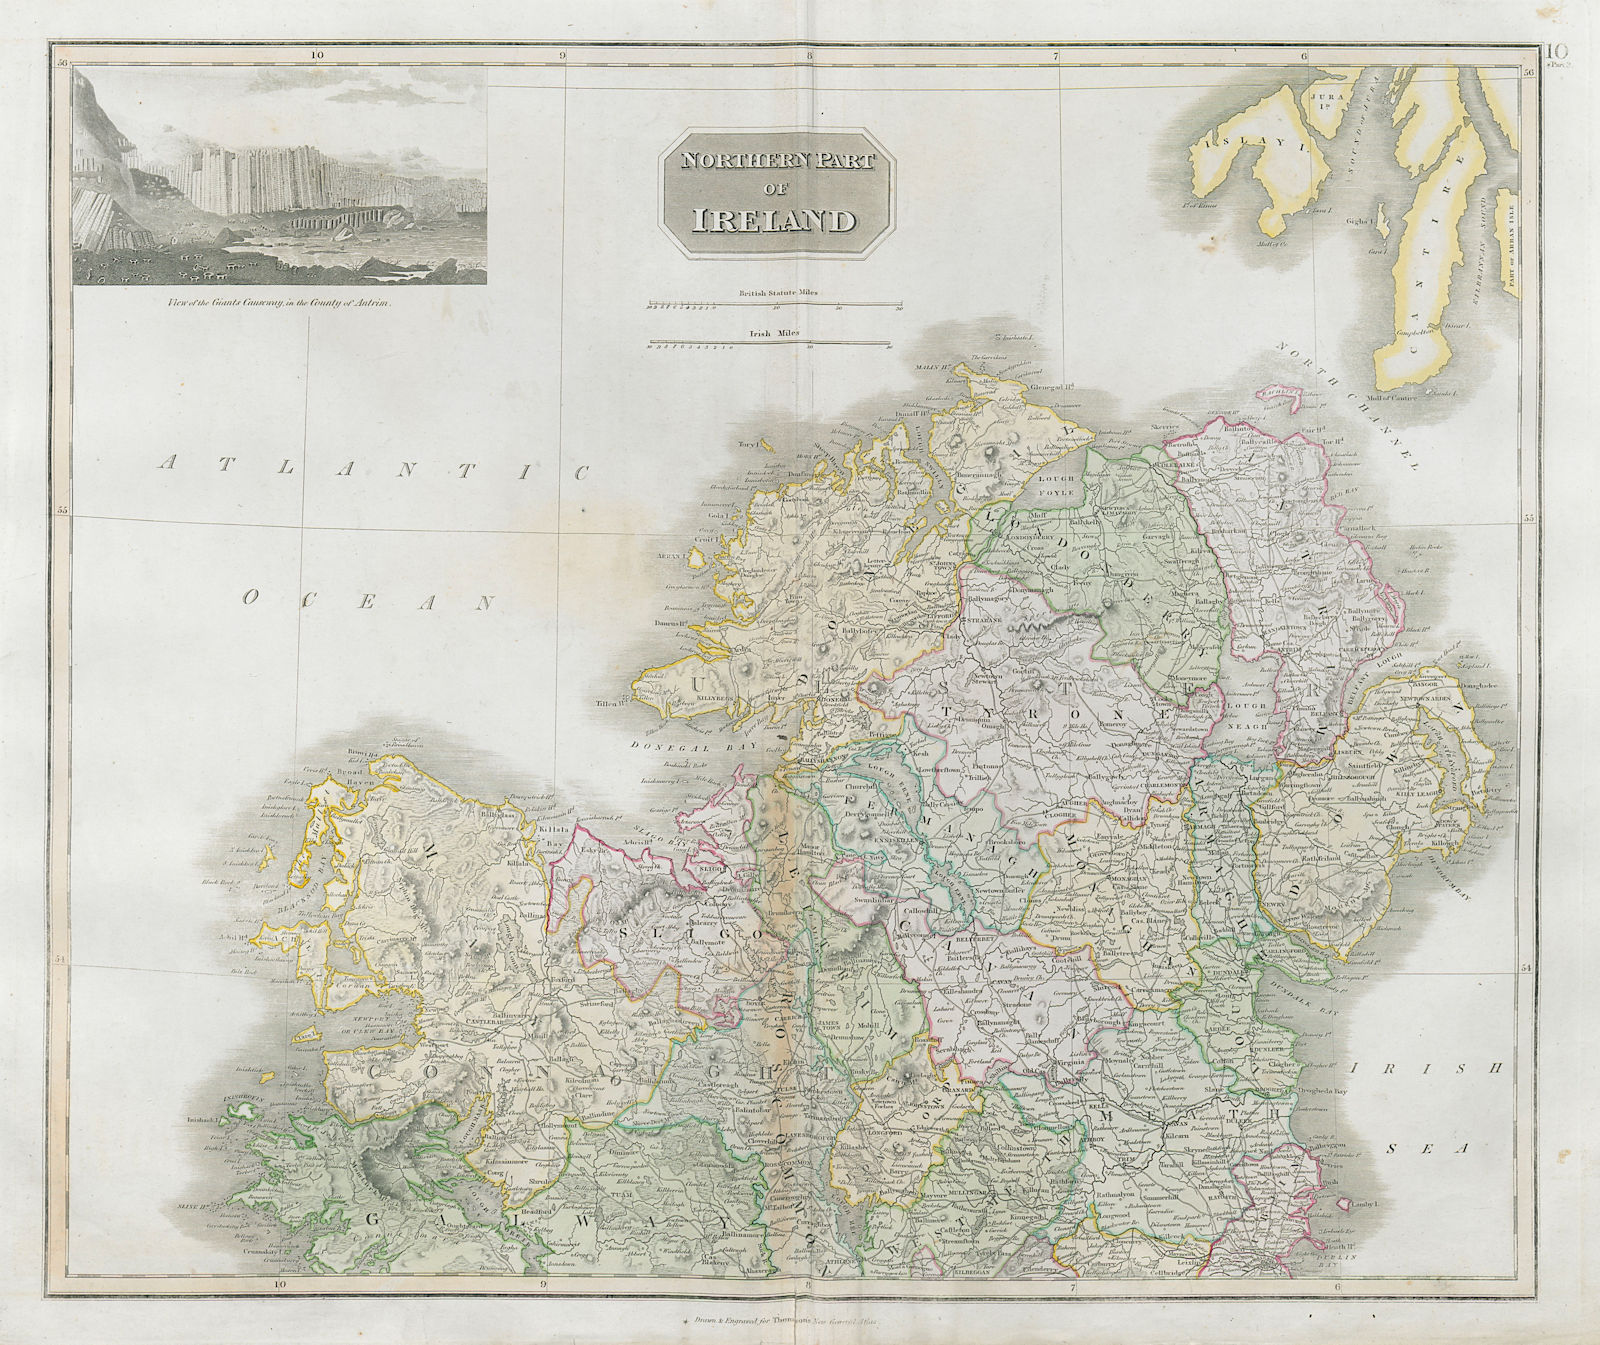 Associate Product Northern part of Ireland. Ulster south to Dublin. Coach roads. THOMSON 1830 map